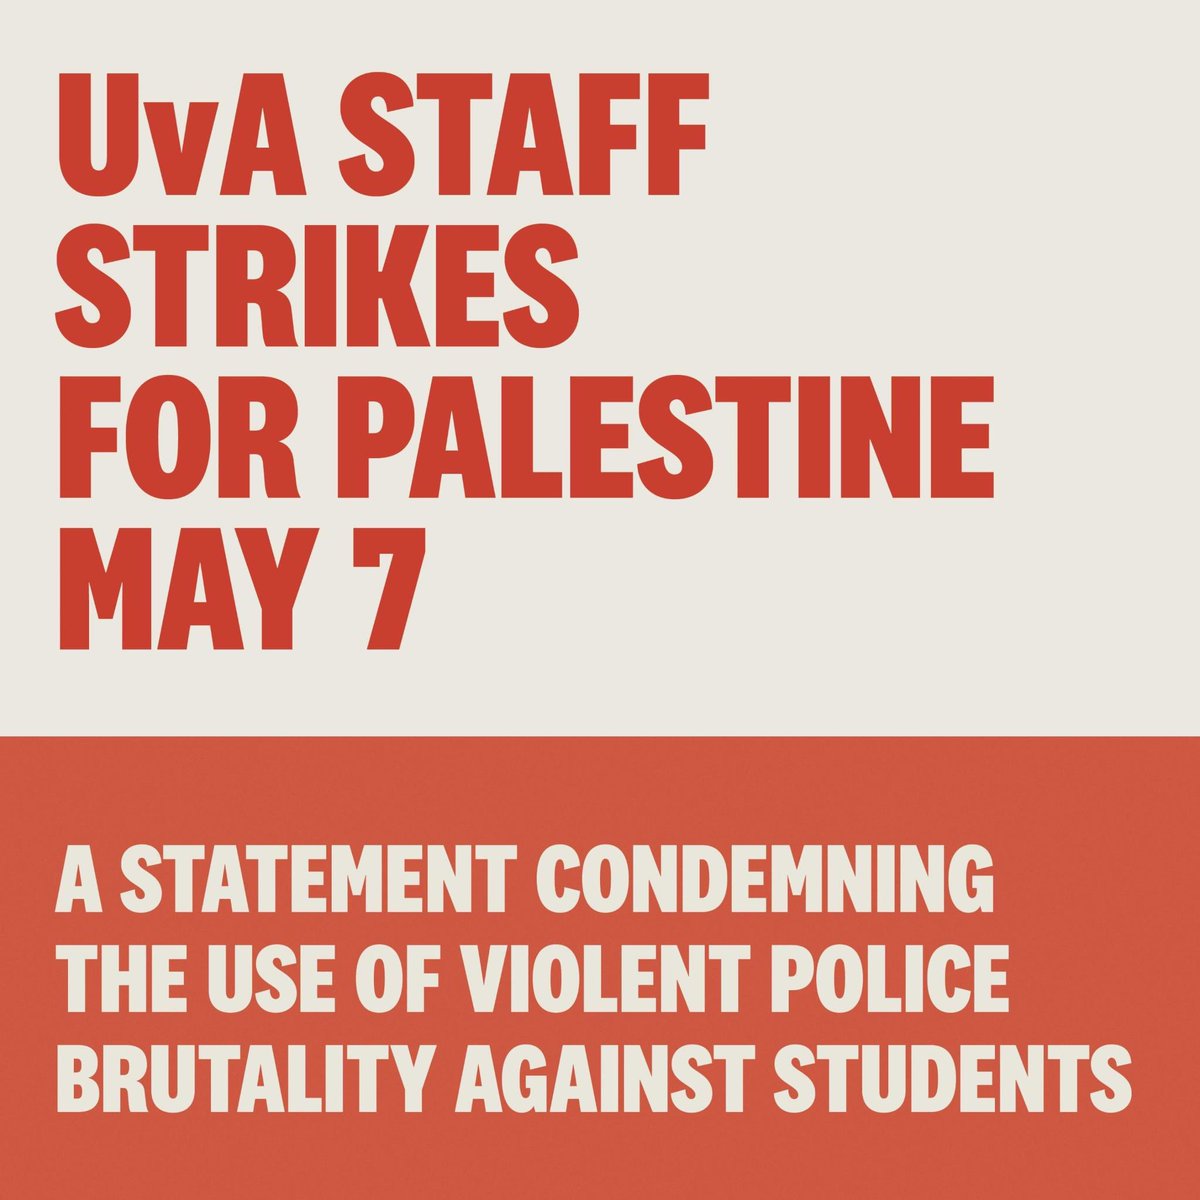 UvA staff strikes for Palestine May 7

A statement condemning the use of violent police brutality against students